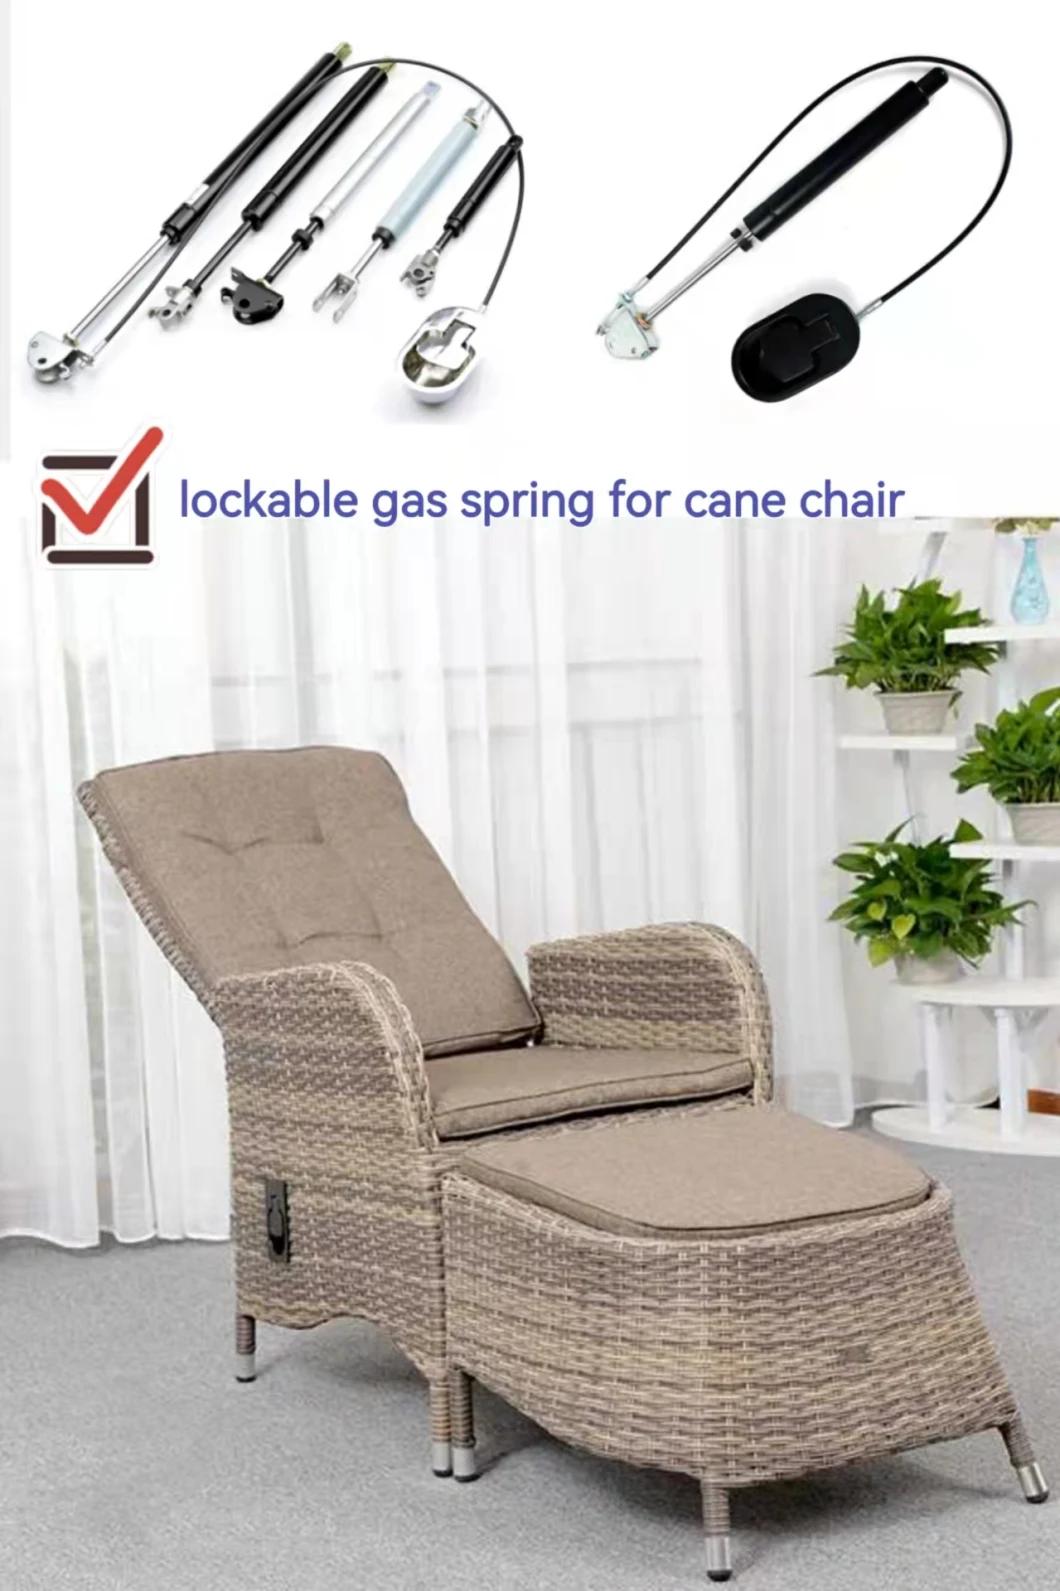 Ruibo Manufacture Sale Furniture Accessories Gas Spring for Cane Chair